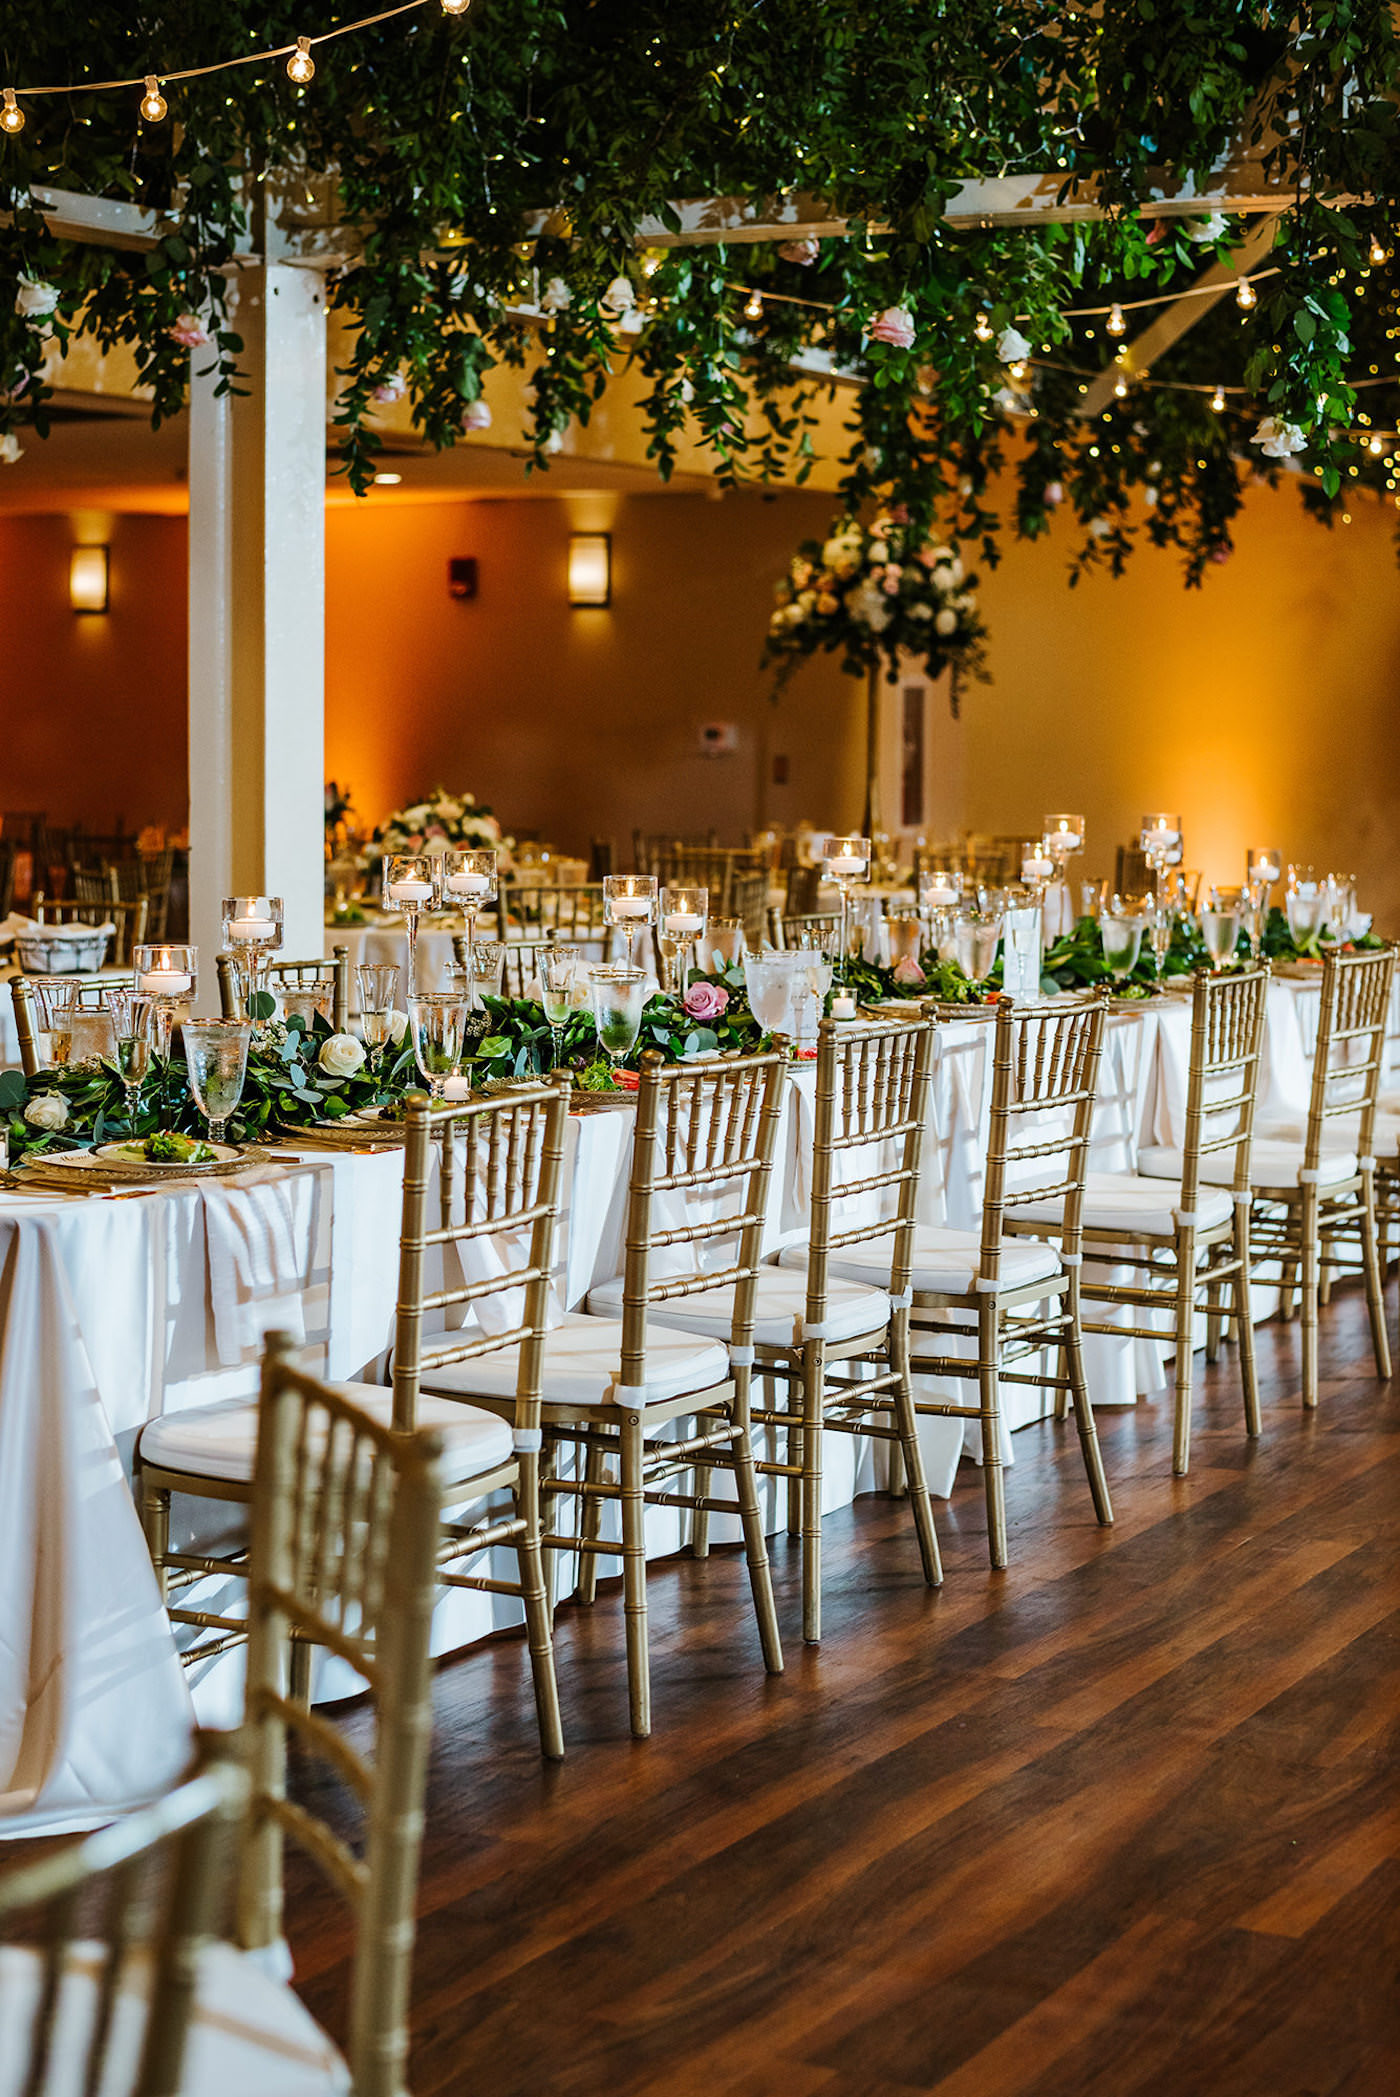 St. Pete Garden Wedding Indoor Reception with Amber Gold Uplighting and Wedding Ceiling Floral Installment with Greenery and Blush Pink and White Roses and Canopy String Lights | Reception Feasting Banquet Table with White Linens and Gold Chiavari Chairs | Monarch Events and Design | A Chair Affair